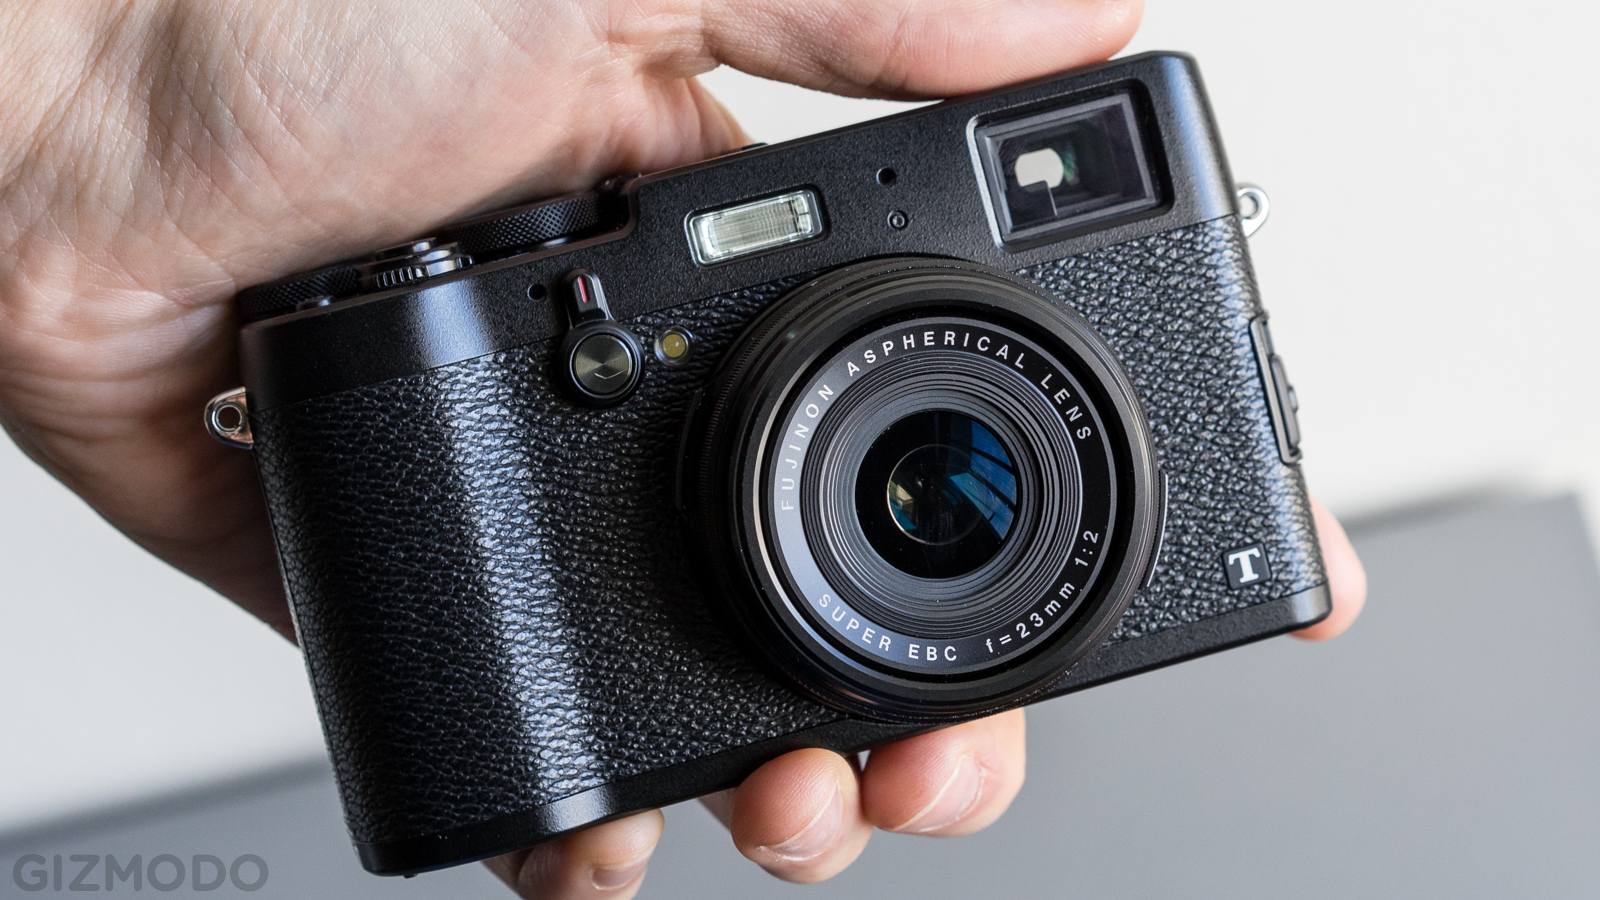 Field Test: Fujifilm’s X100T Is The Most Amazing Camera I’d Never Buy